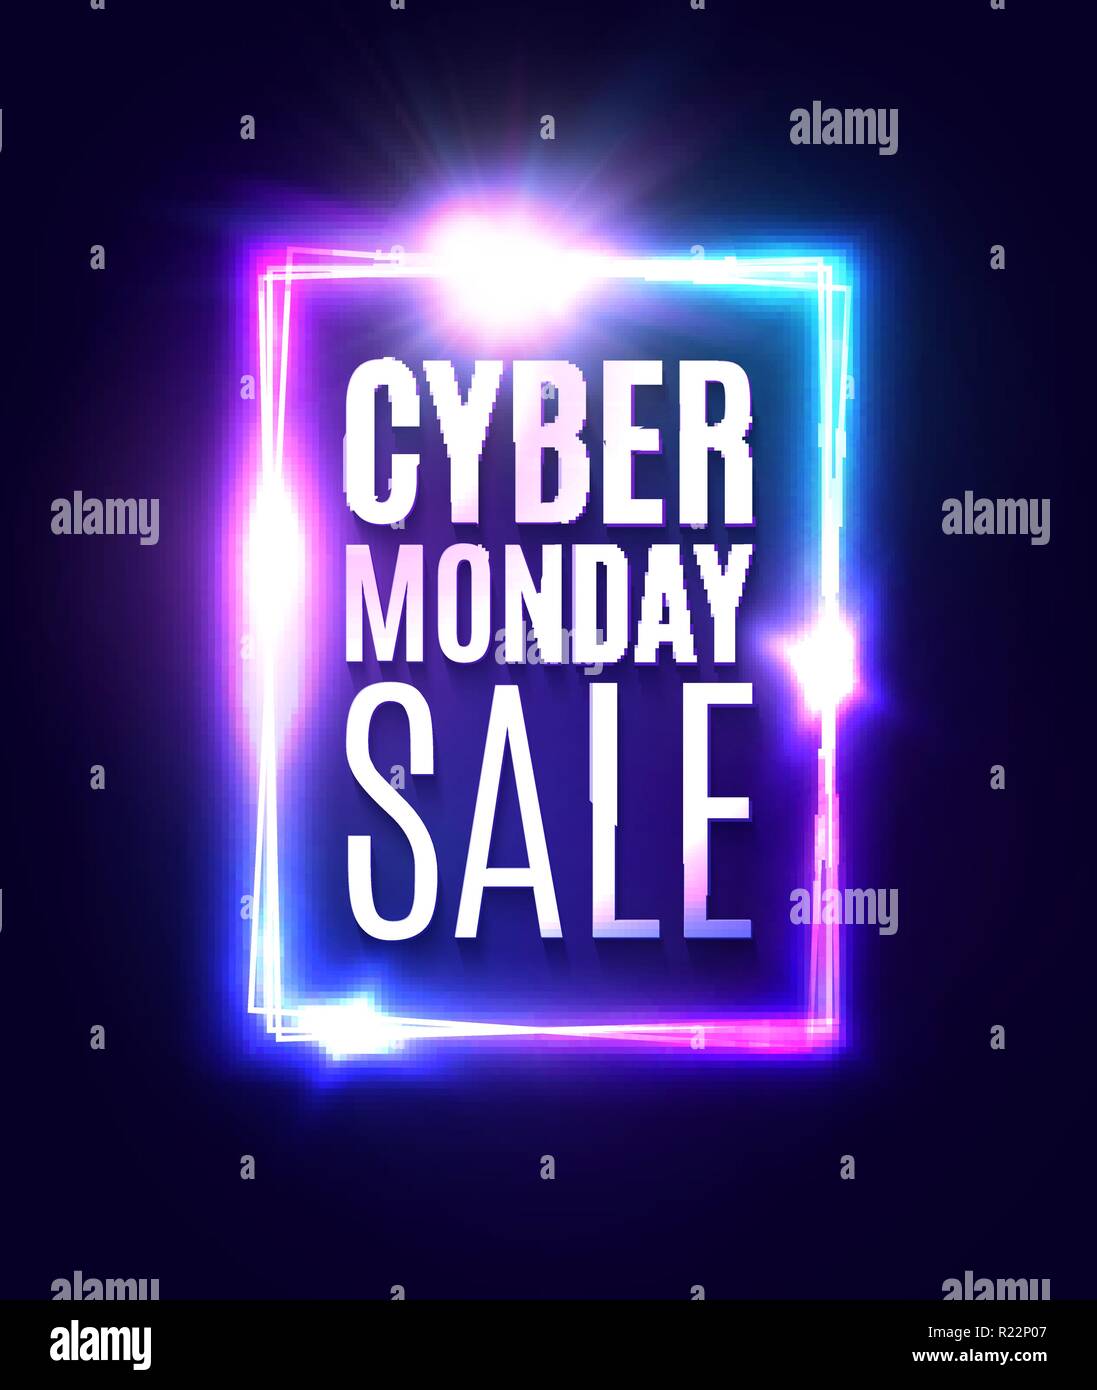 Cyber Monday sale text in neon laser rectangle background. Shining square sign on dark blue backdrop with explosion firework. Banner or flyer design template. Light vector illustration. Stock Vector